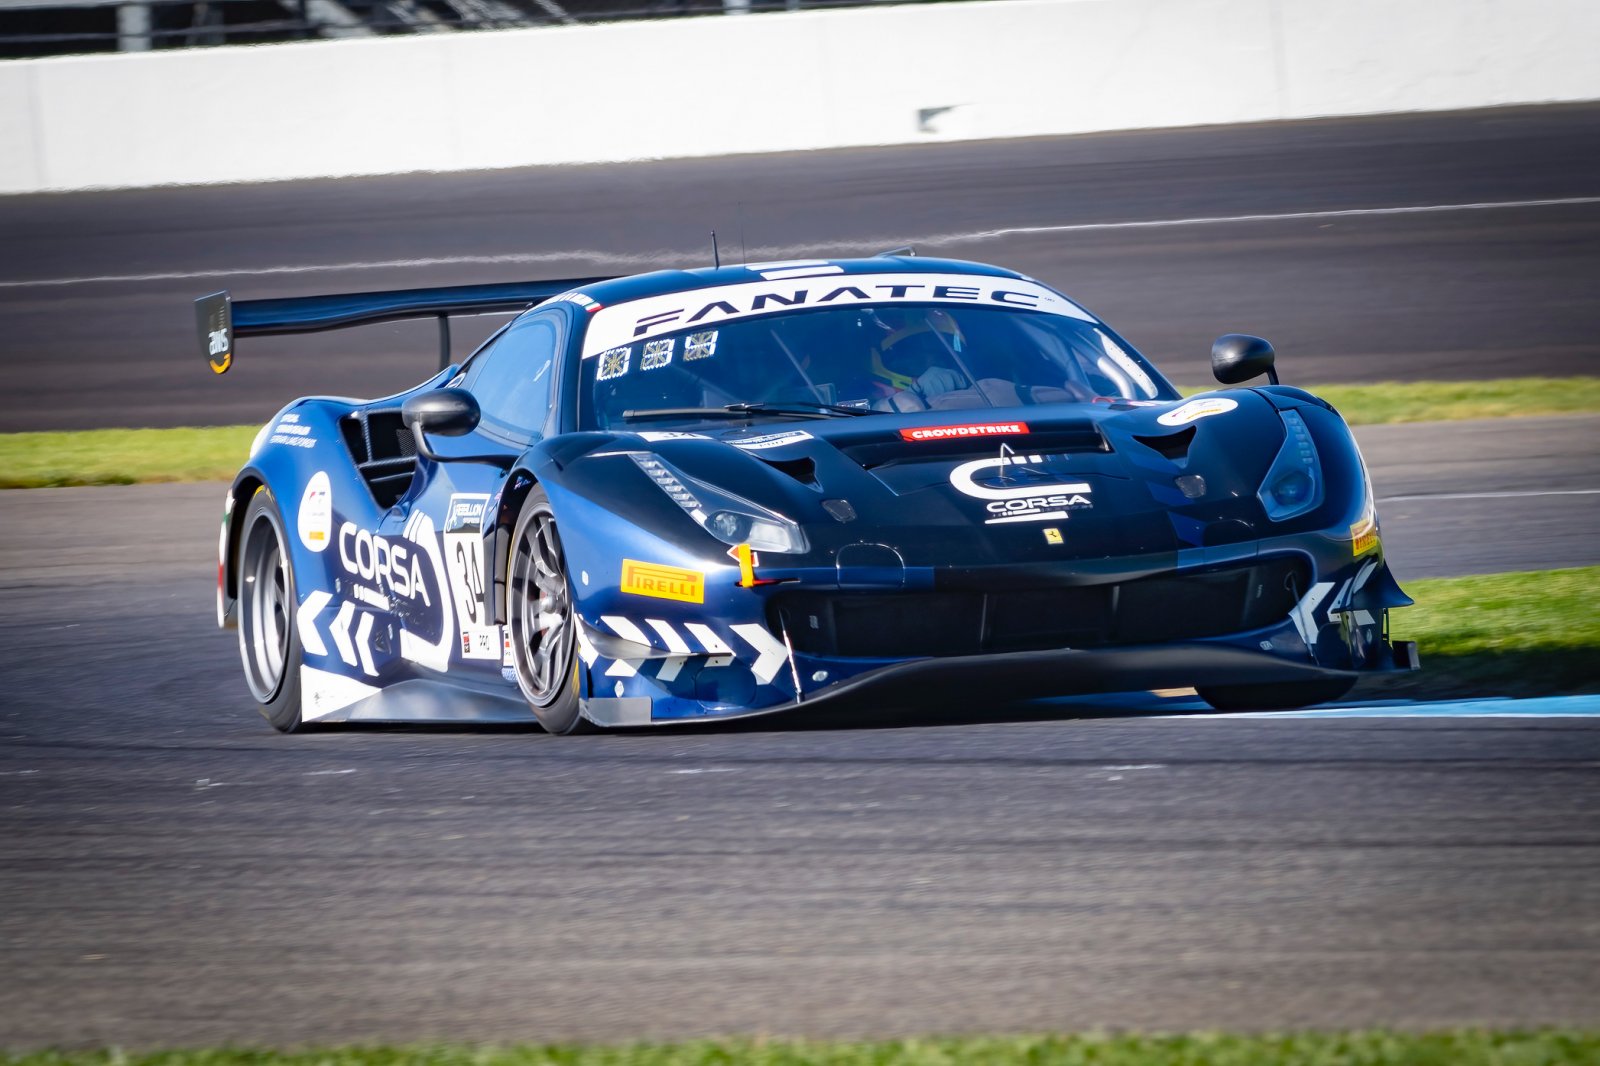 Conquest Racing Competes in Home Race this Weekend with Balzan, Mancinelli and Sbirrazzuoli in the No. 34 Conquest Racing/Corsa Horizon Ferrari 488 GT3 in the Indianapolis 8 Hour presented by AWS